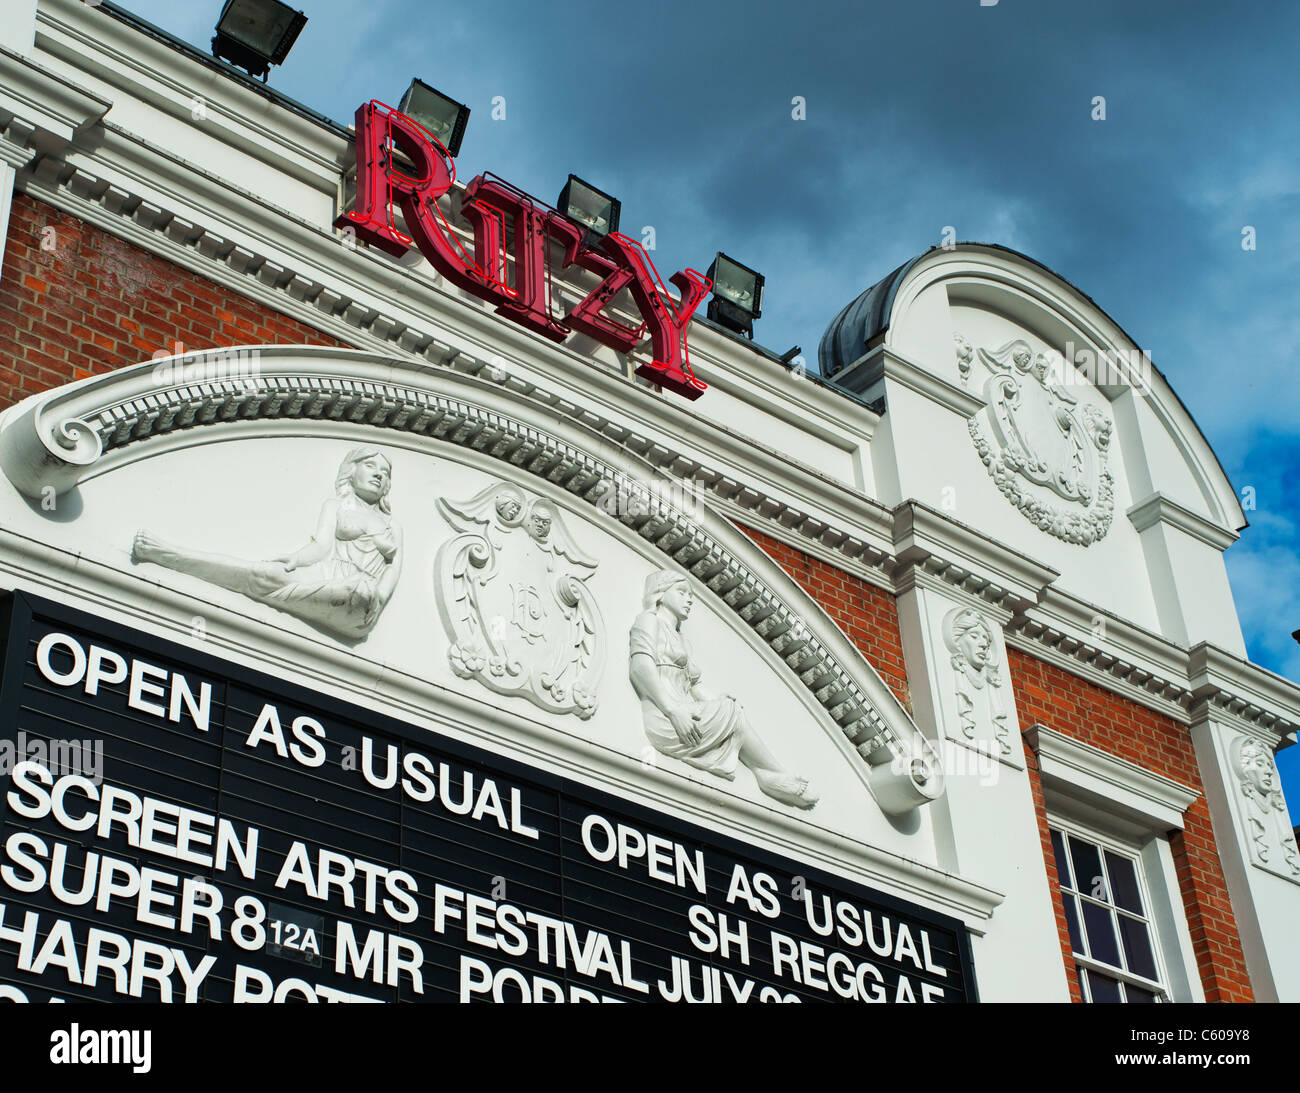 Ritzy Cinema, Brixton 'Open as usual'  during the London Riots, August 2011. Stock Photo